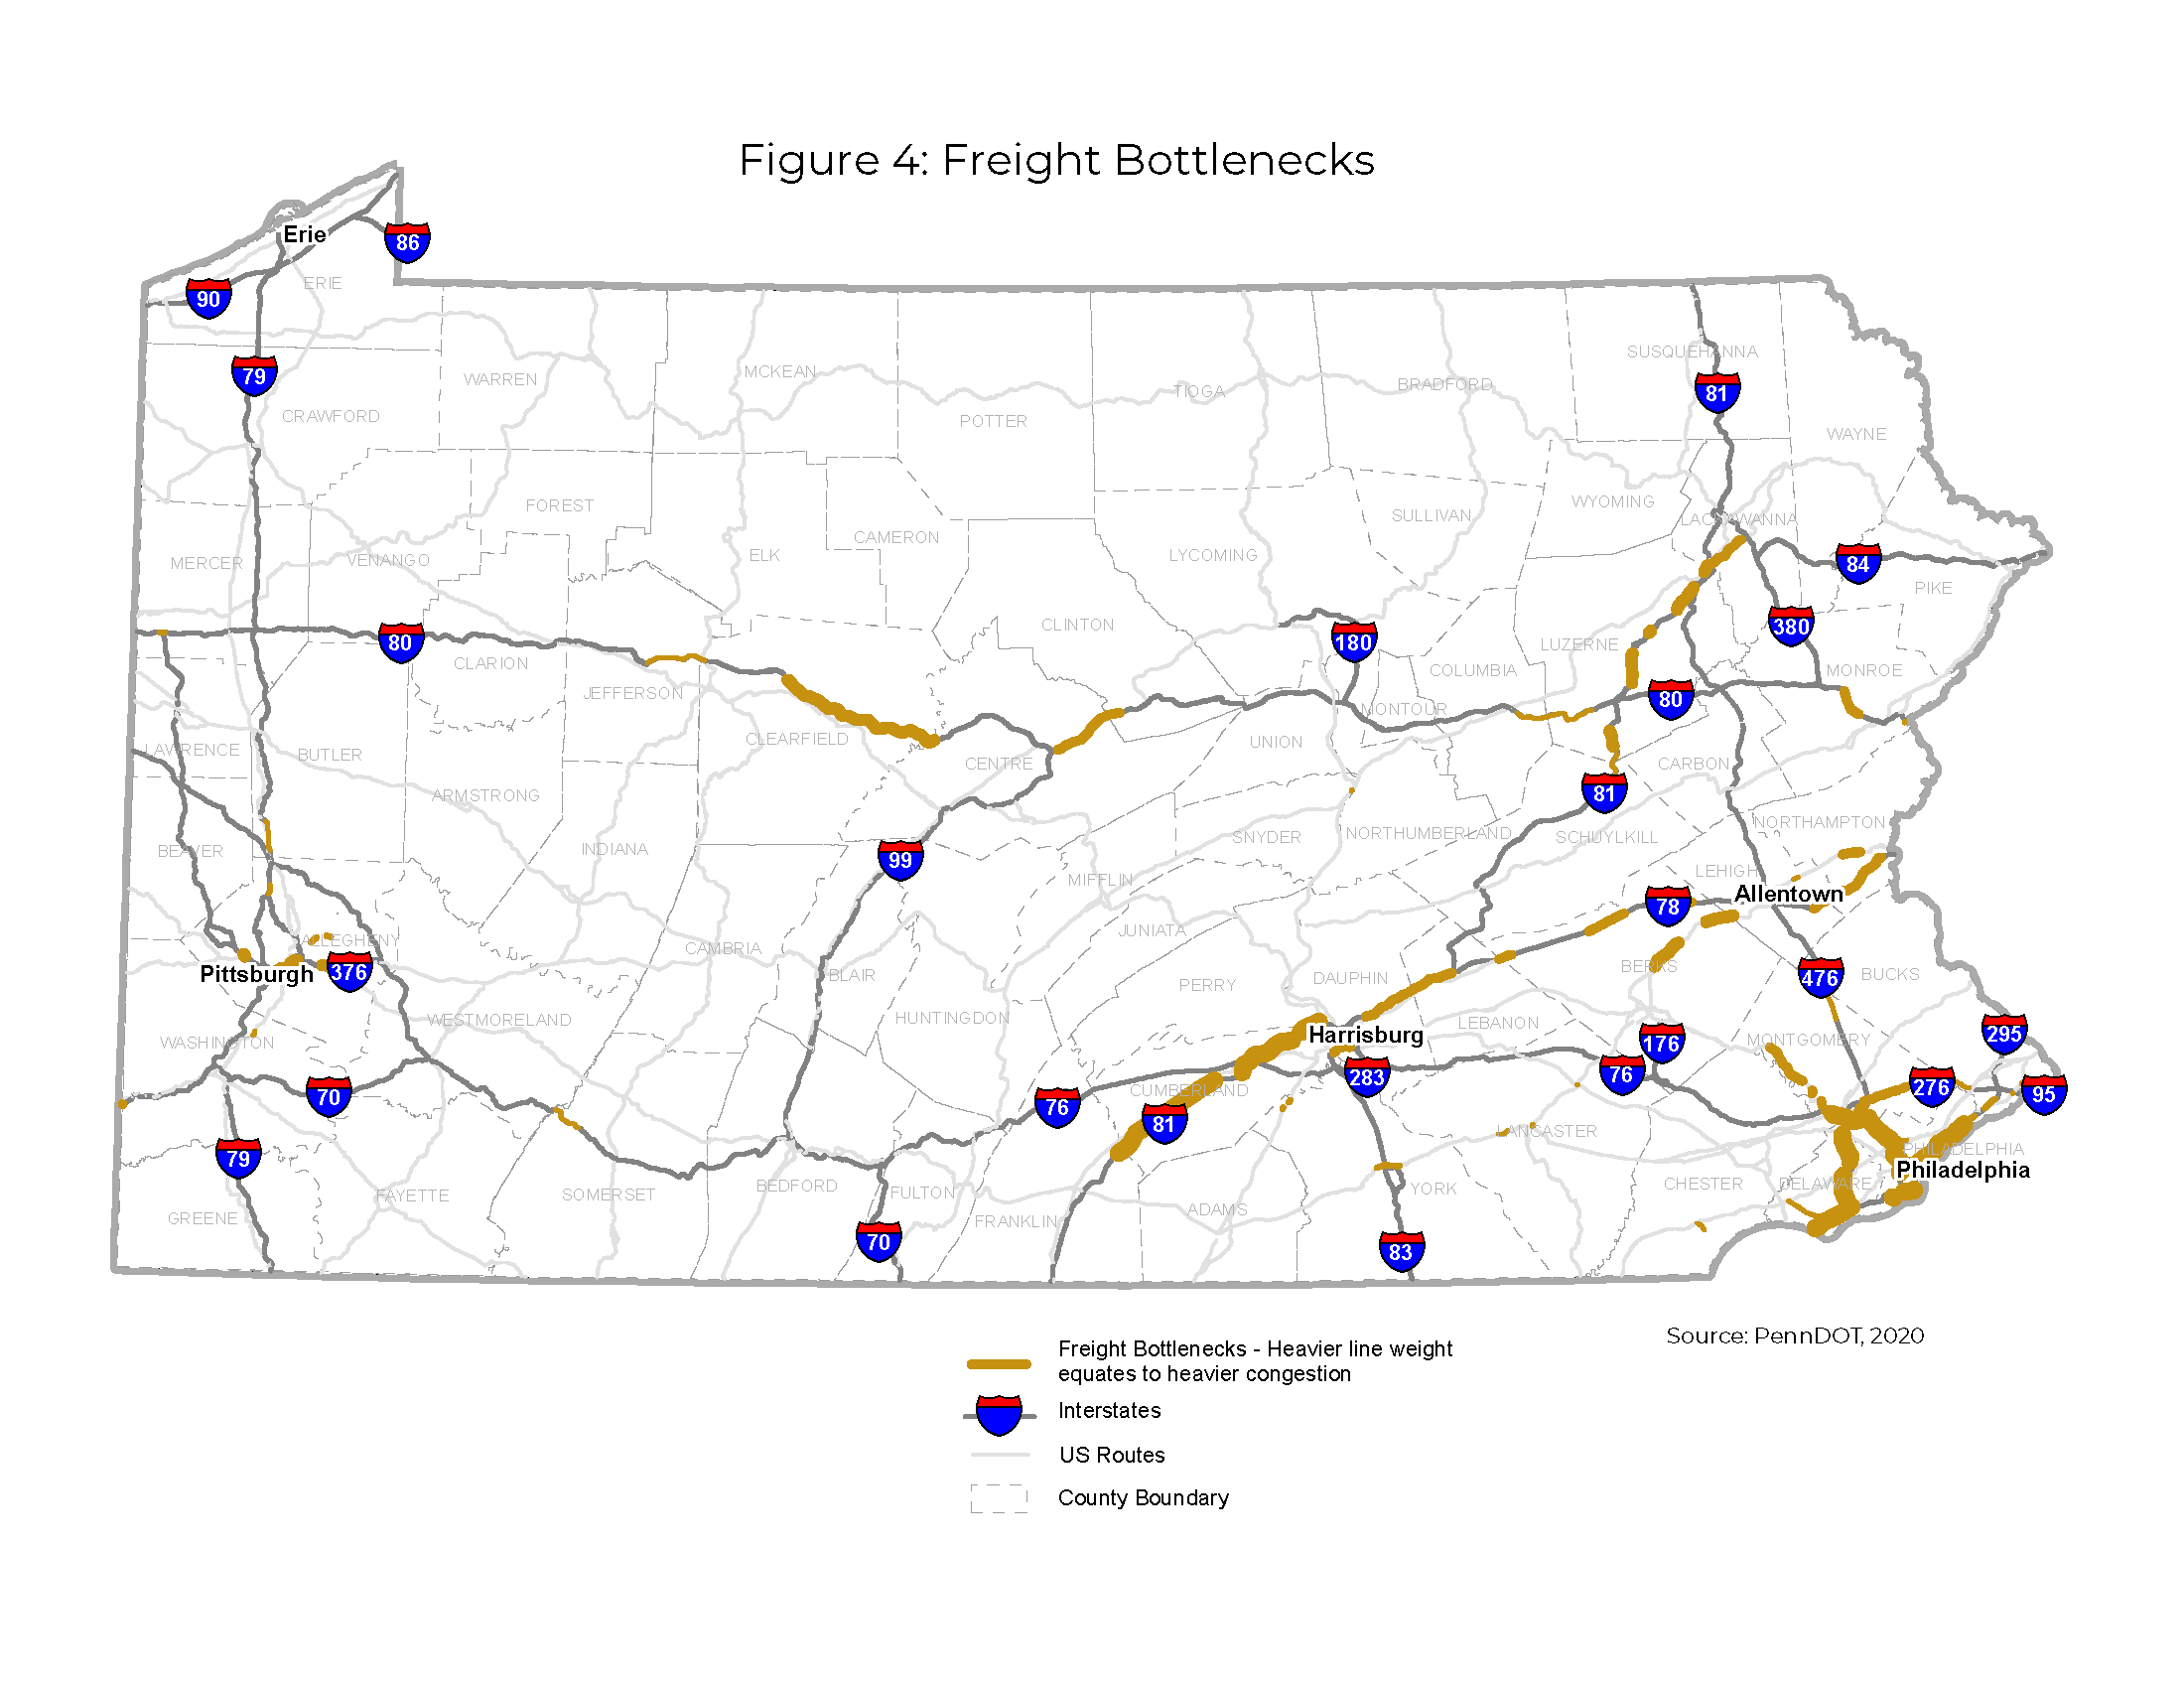 Figure 4 is a state map of Pennsylvania illustrating the Freight Bottlenecks with heavy lines to indicate heavy congestion.